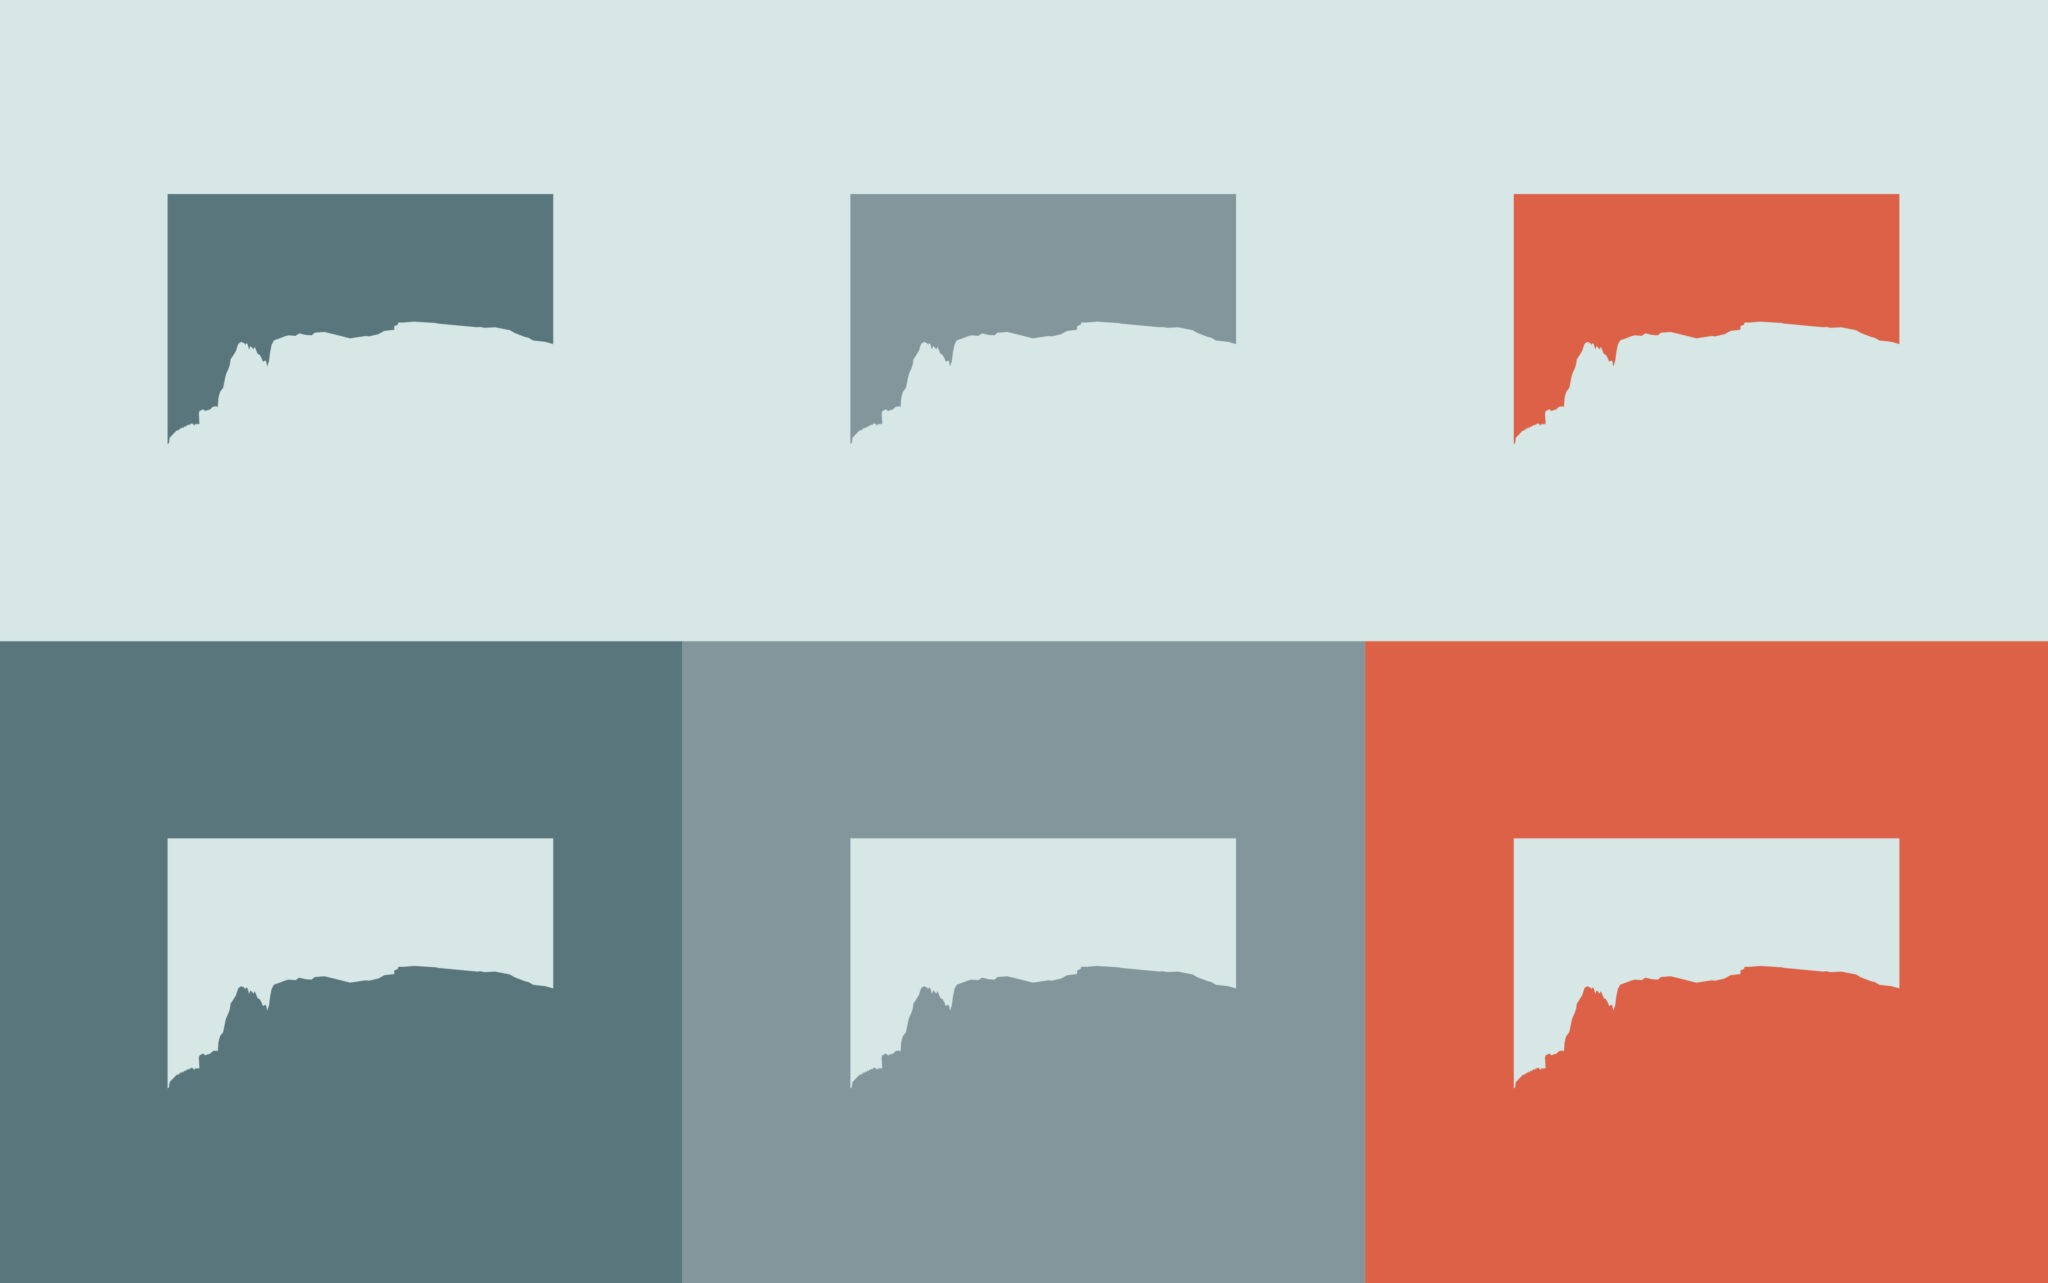 An image showcasing the picture marks for Lord Jens Kramer's visual identity, presented in a range of colors. The image features three of the picture marks at the top of a light grey-teal background, and three at the bottom on darker backgrounds, including a red one. The picture marks represent the visual identity of Lord Jens Kramer and are designed to be recognisable and distinctive in a variety of contexts.